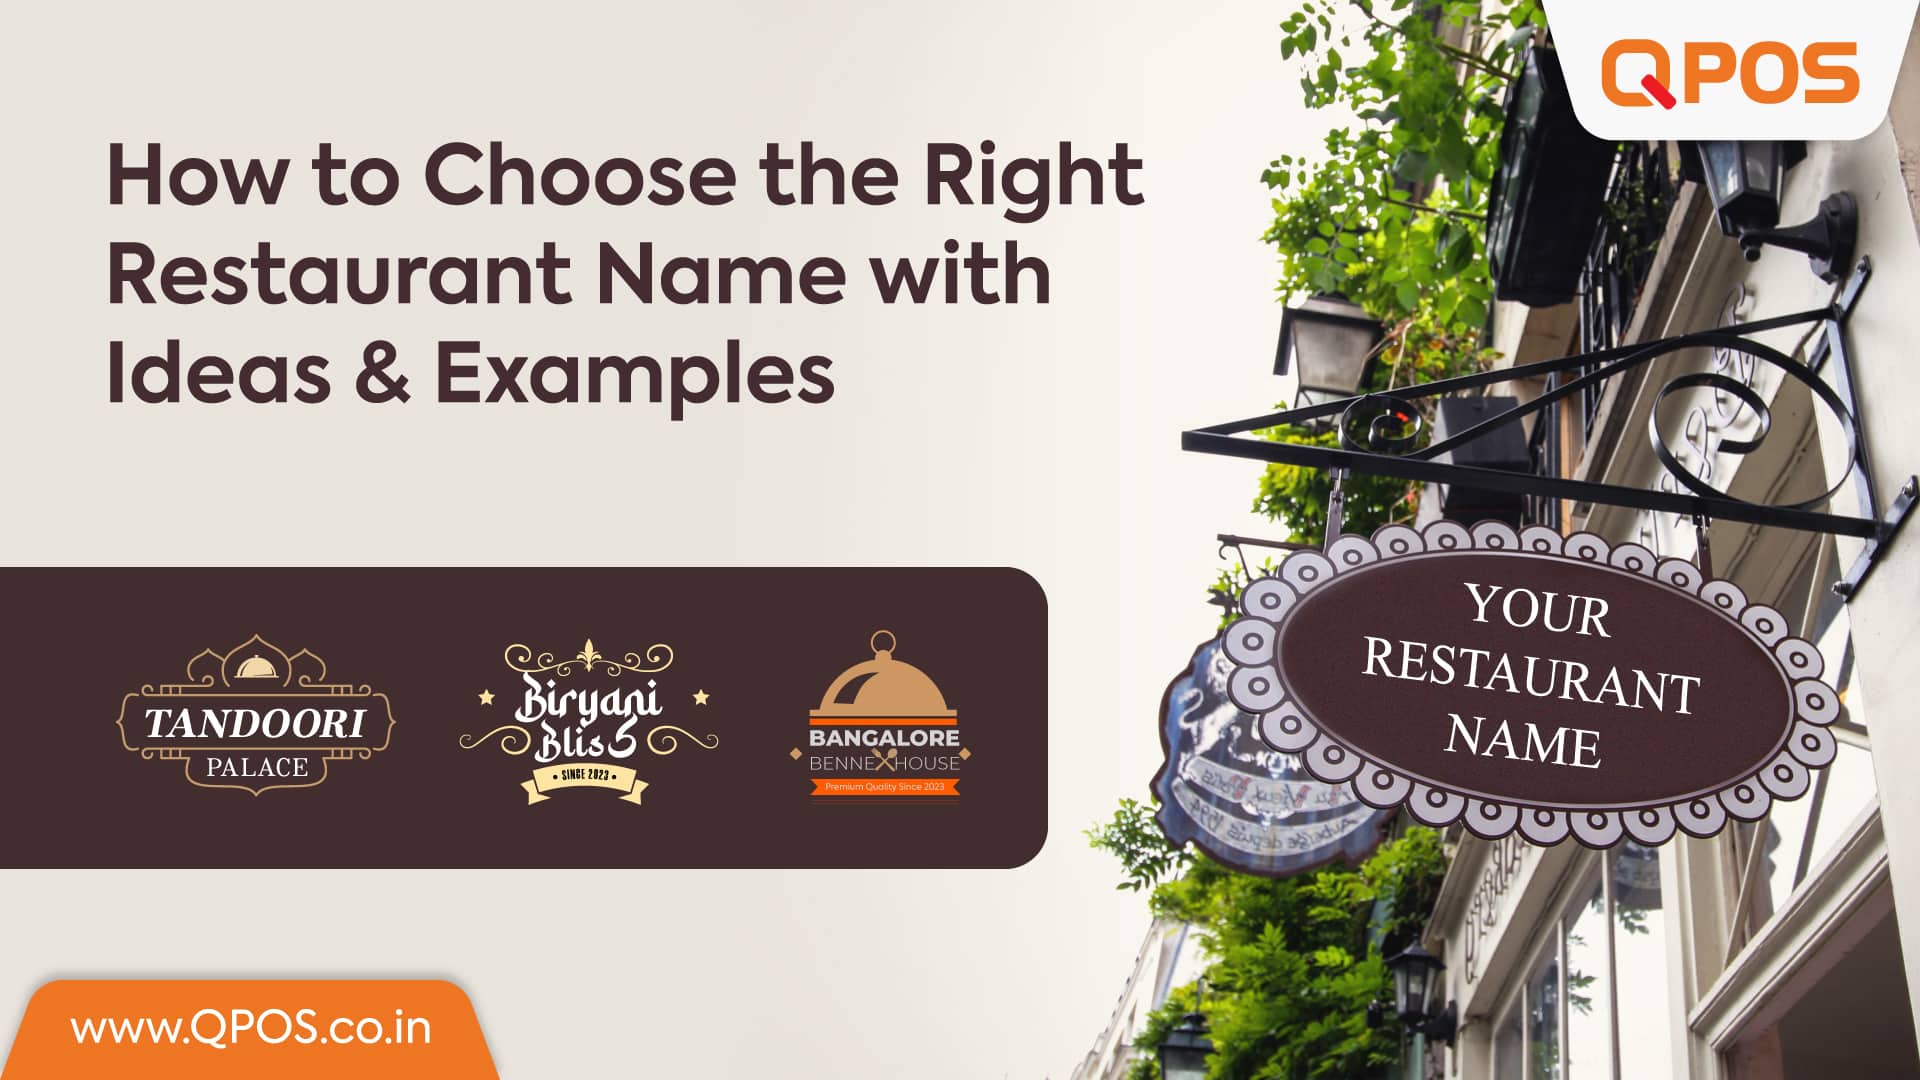 How to Choose the Right Restaurant Name with Ideas & Examples